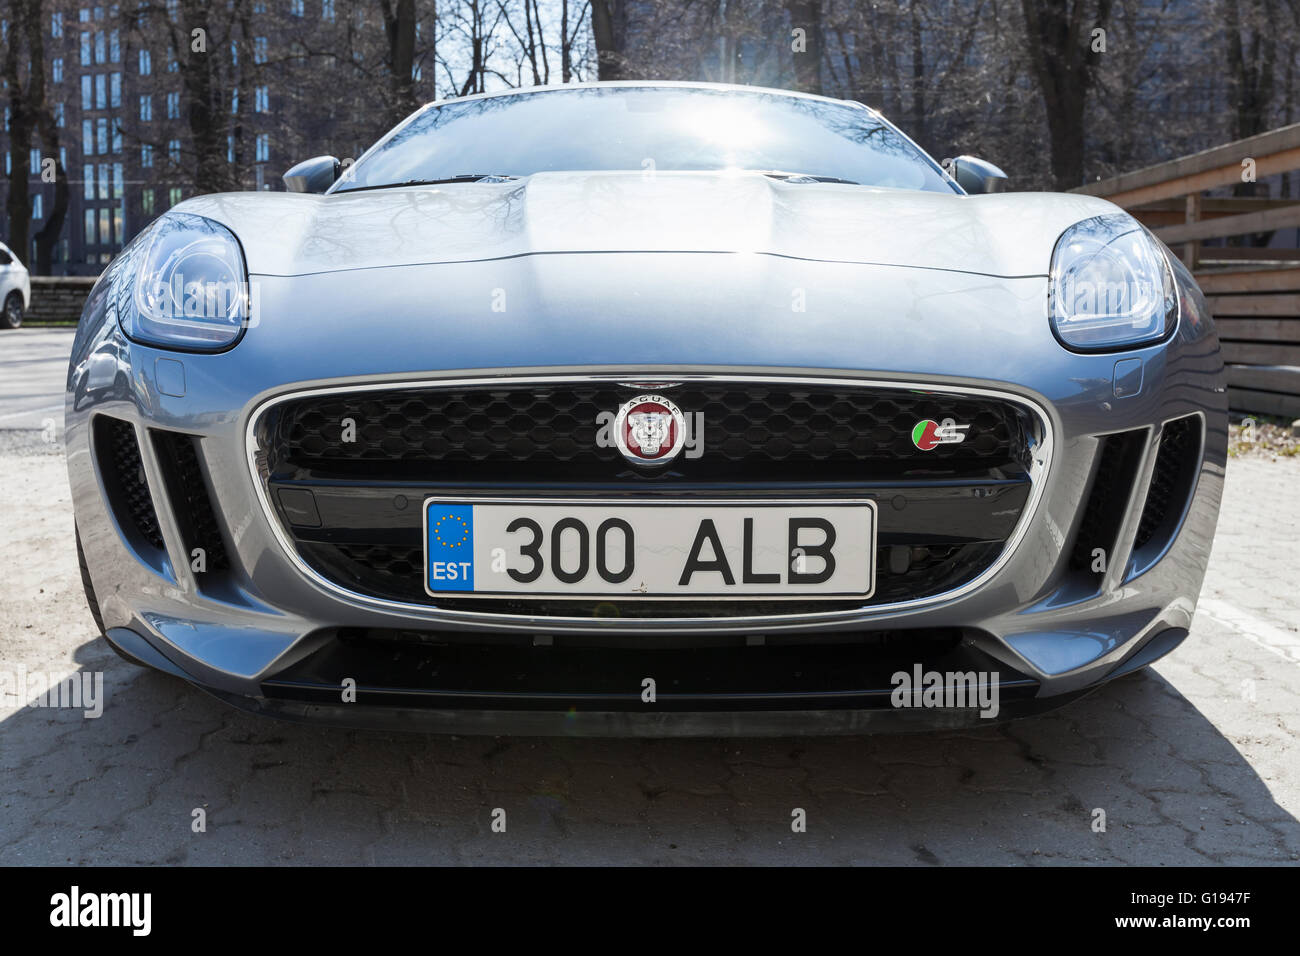 Tallinn, Estonia - May 2, 2016: Jaguar F-Type coupe, front view. Two-seat sports car, based on a platform of the XK convertible, Stock Photo